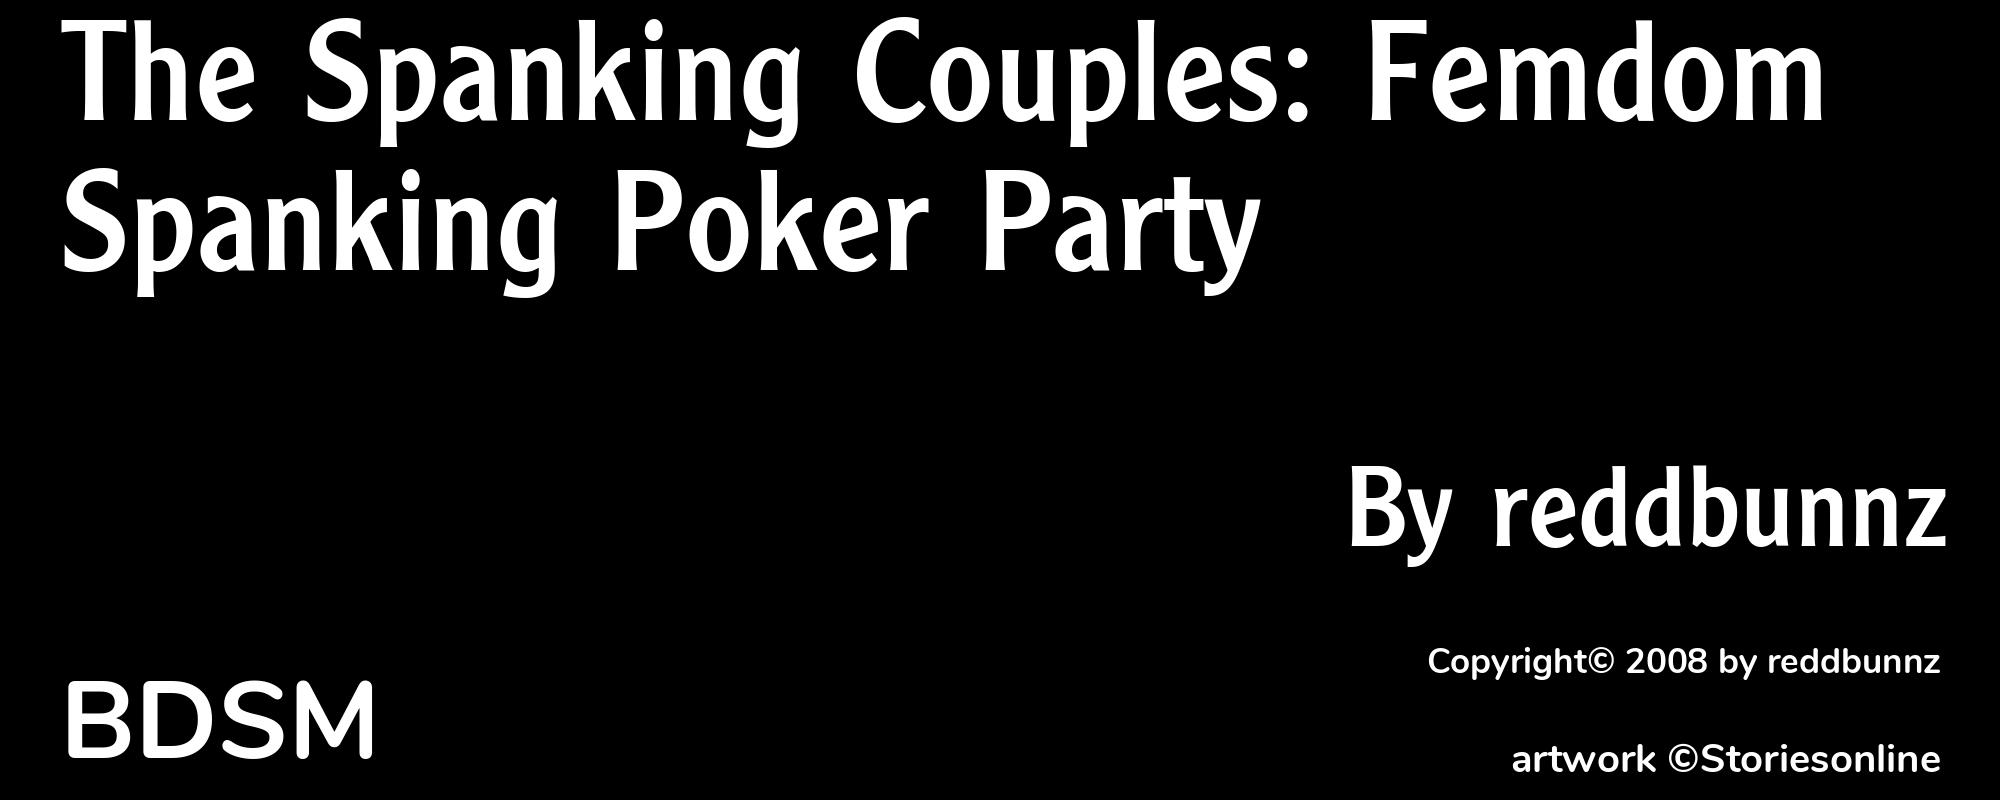 The Spanking Couples: Femdom Spanking Poker Party - Cover